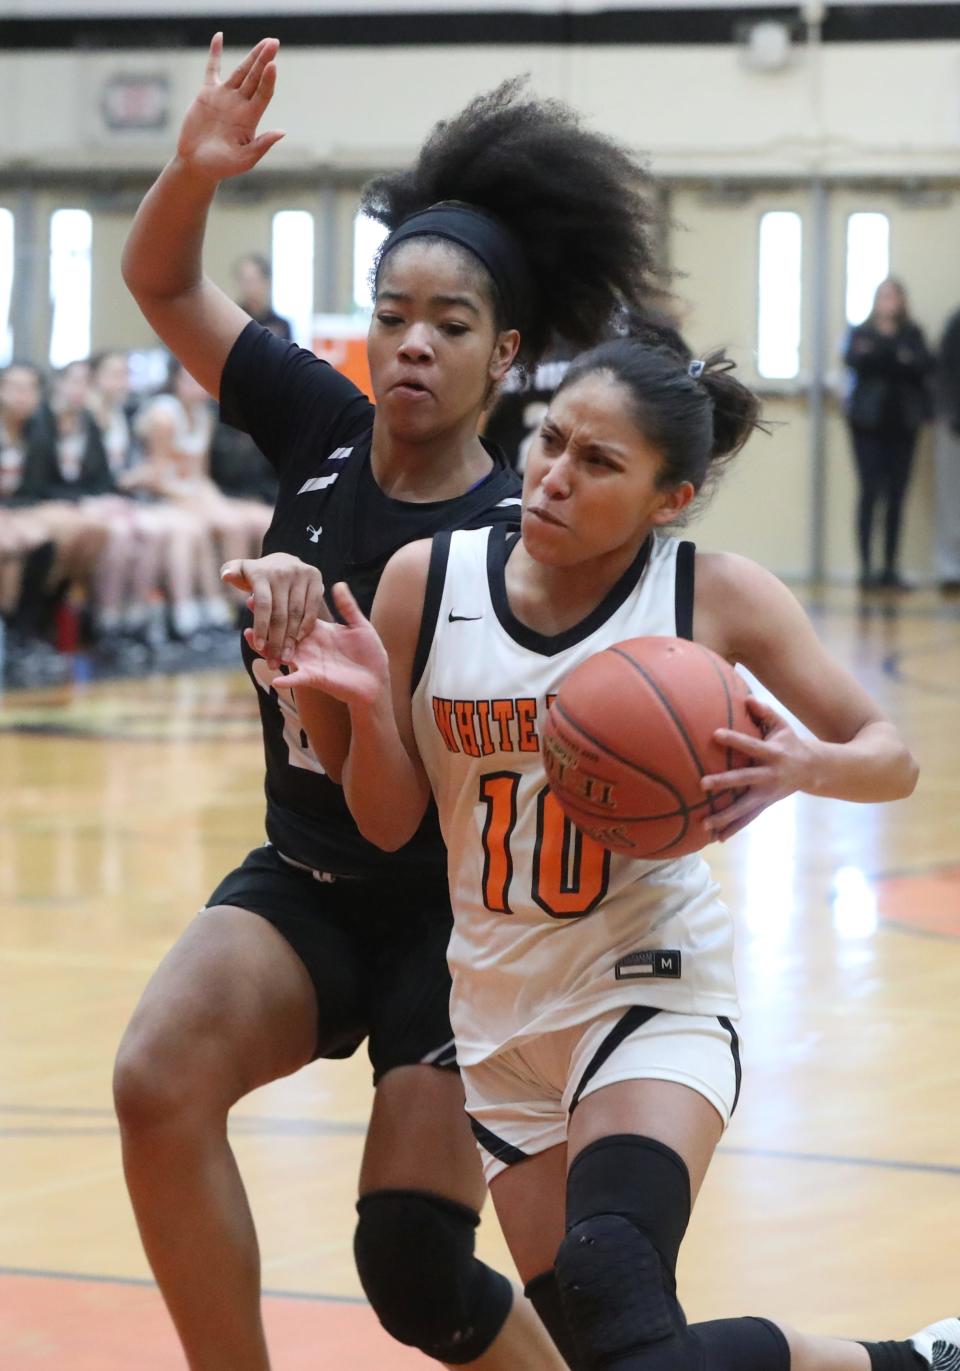 White Plains' Ineivi Plata is pressured by New Rochelle's Skye Presley during a Section 1 Class AA quarterfinal at Mamaroneck Feb. 24, 2023. White Plains won 65-42.